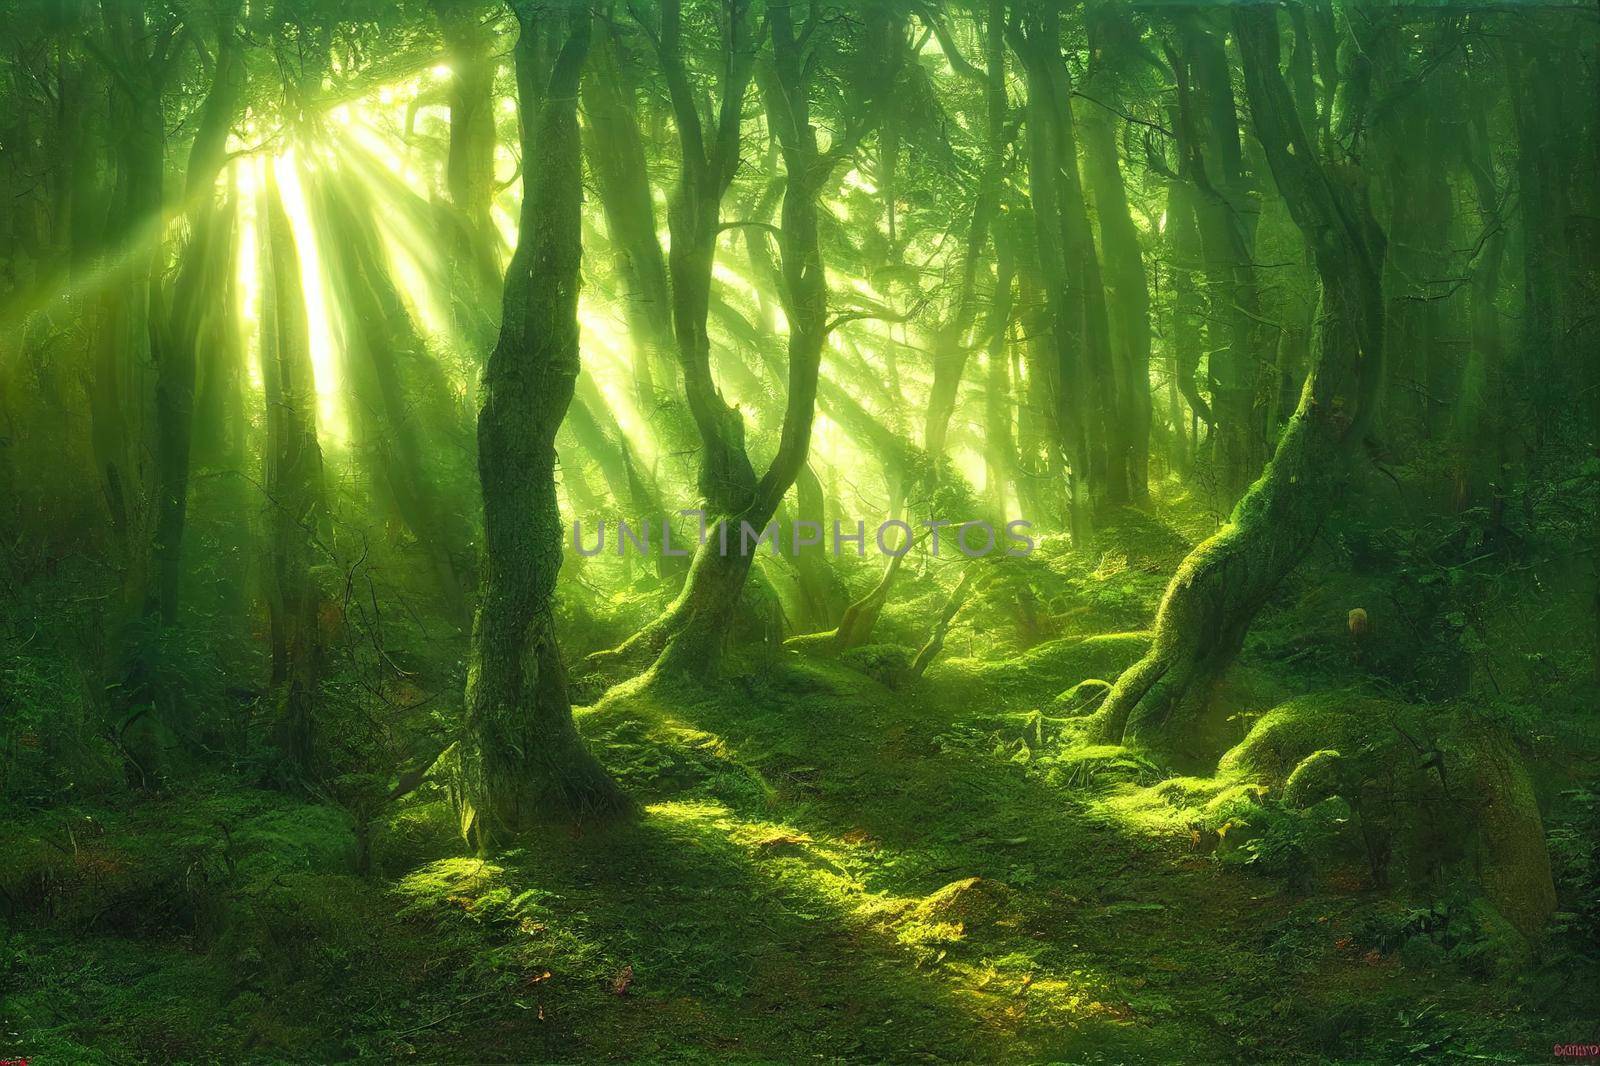 golden sunlight in a mysterious Scandinavian forest, a forest of myths and legends, rays of the sun, a mossy ancient woods, a forest from a fairy tale, picturesque. High quality illustration